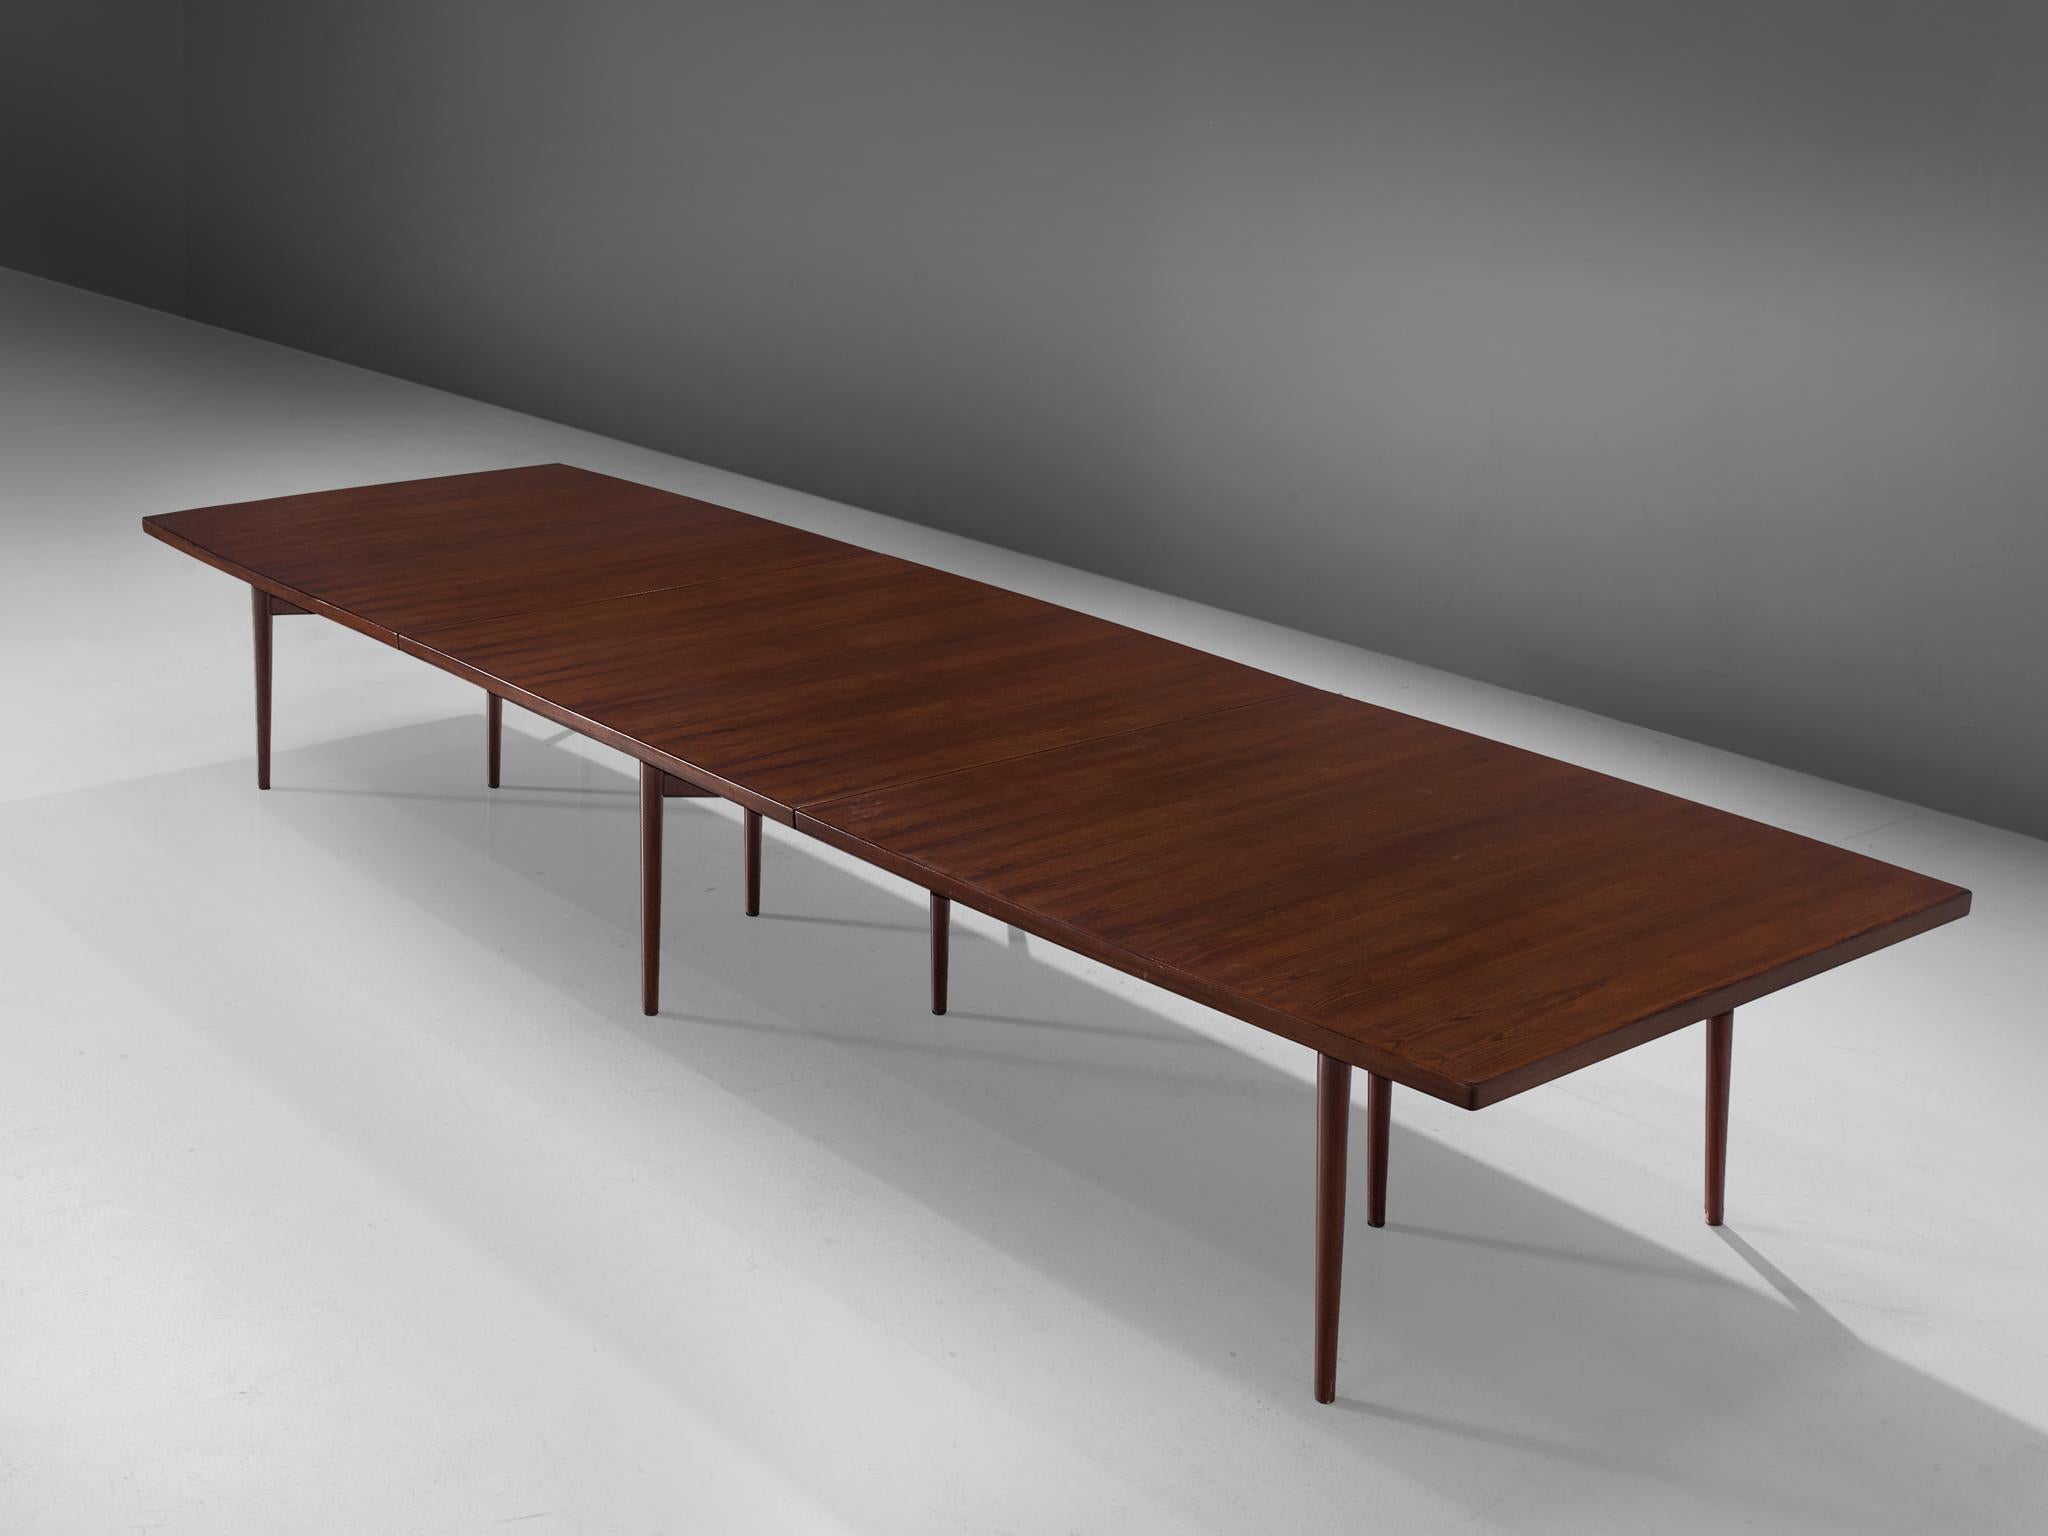 Arne Vodder for Sibast Furniture, rosewood, dining table, Denmark, 1960s.

This dining table or conference table is executed with rosewood veneer. The straight top that is made out of three pieces is supported with a sculptural frame that has